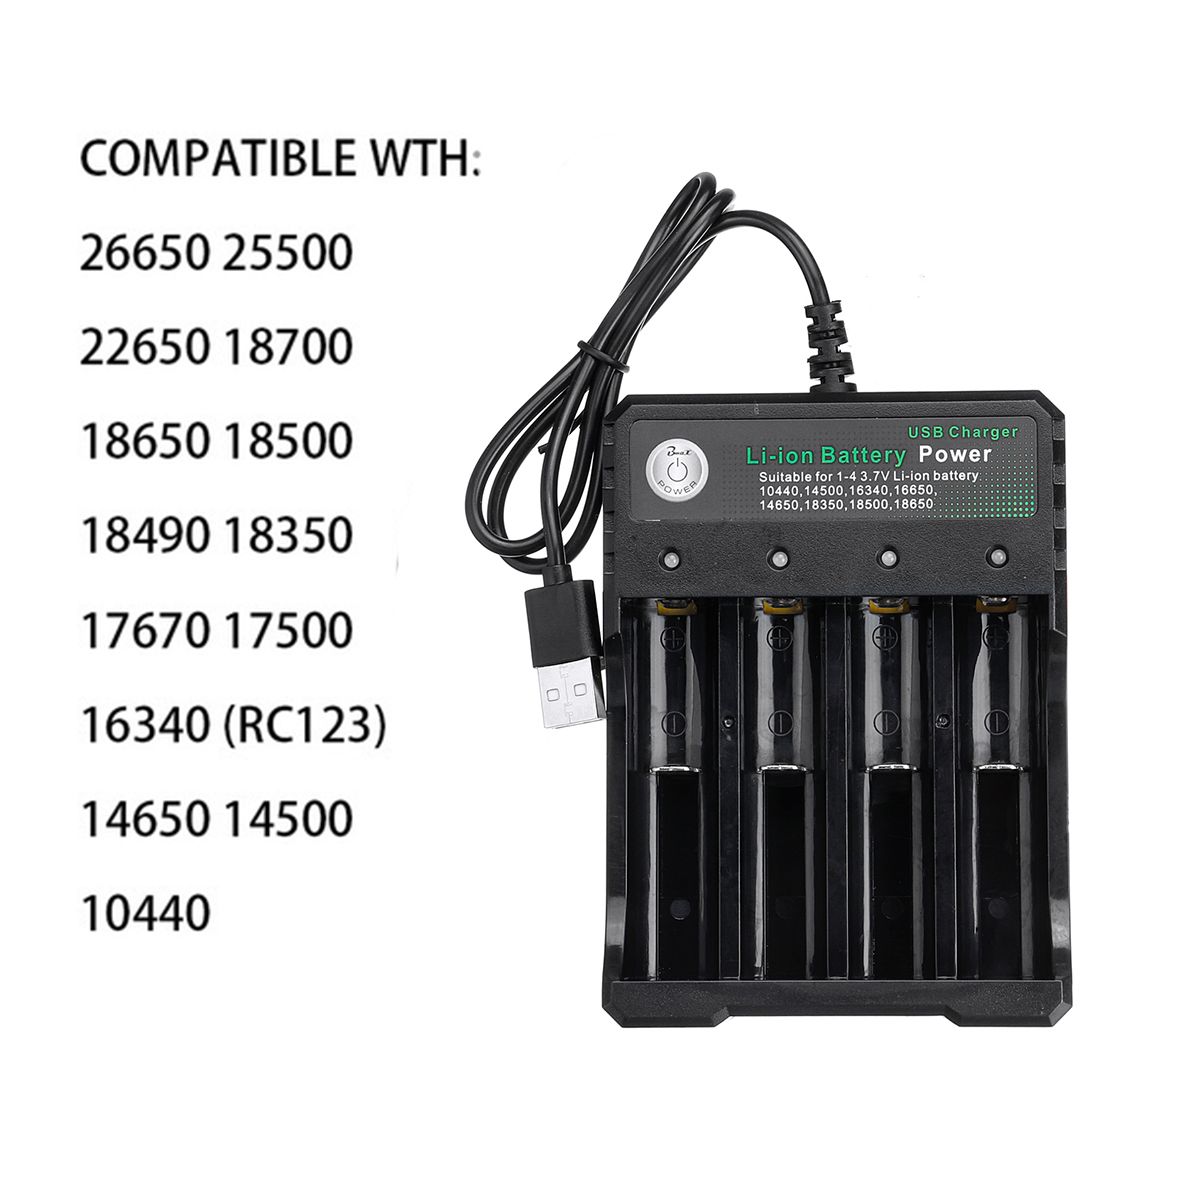 Charger-4-Slot-37v-Battery-Charger-Multifunction-Charge-Universal-1618230